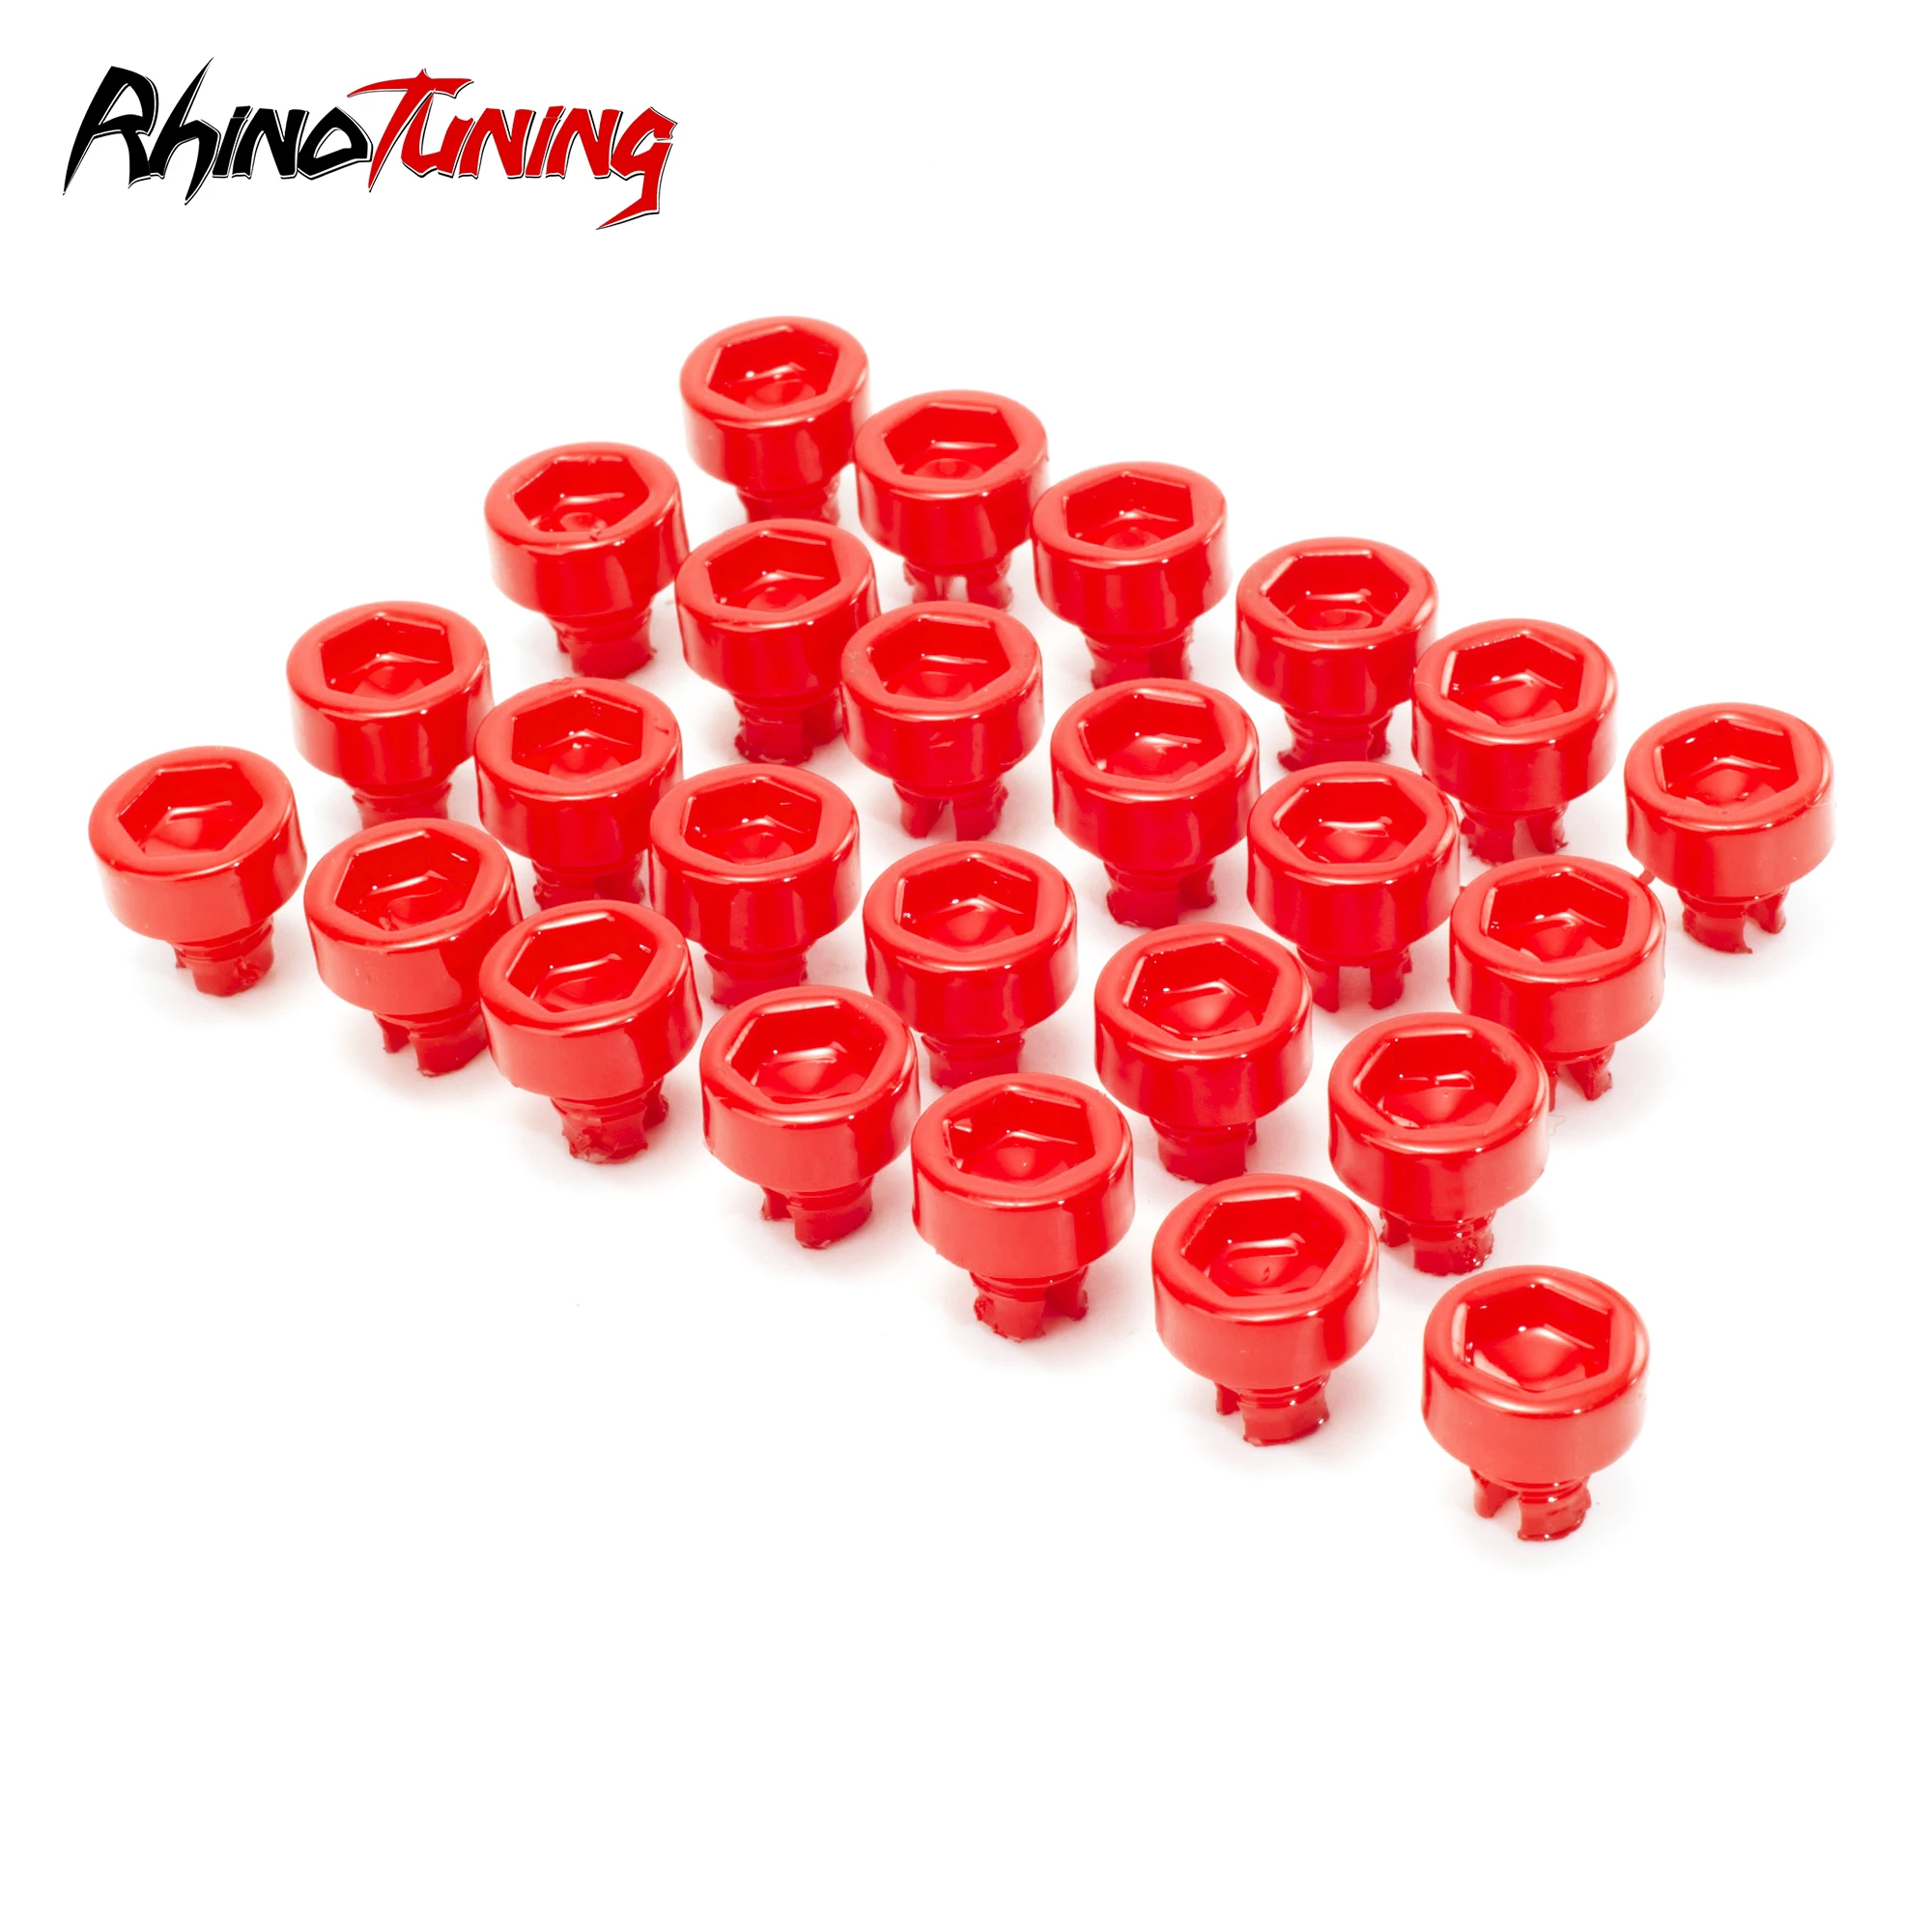 

100pcs Universal Wheel Rivets Nuts For Rim Cap Lip Screw Bolt Tires Decoration Replacement Car Styling Tunning Parts ABS Plastic